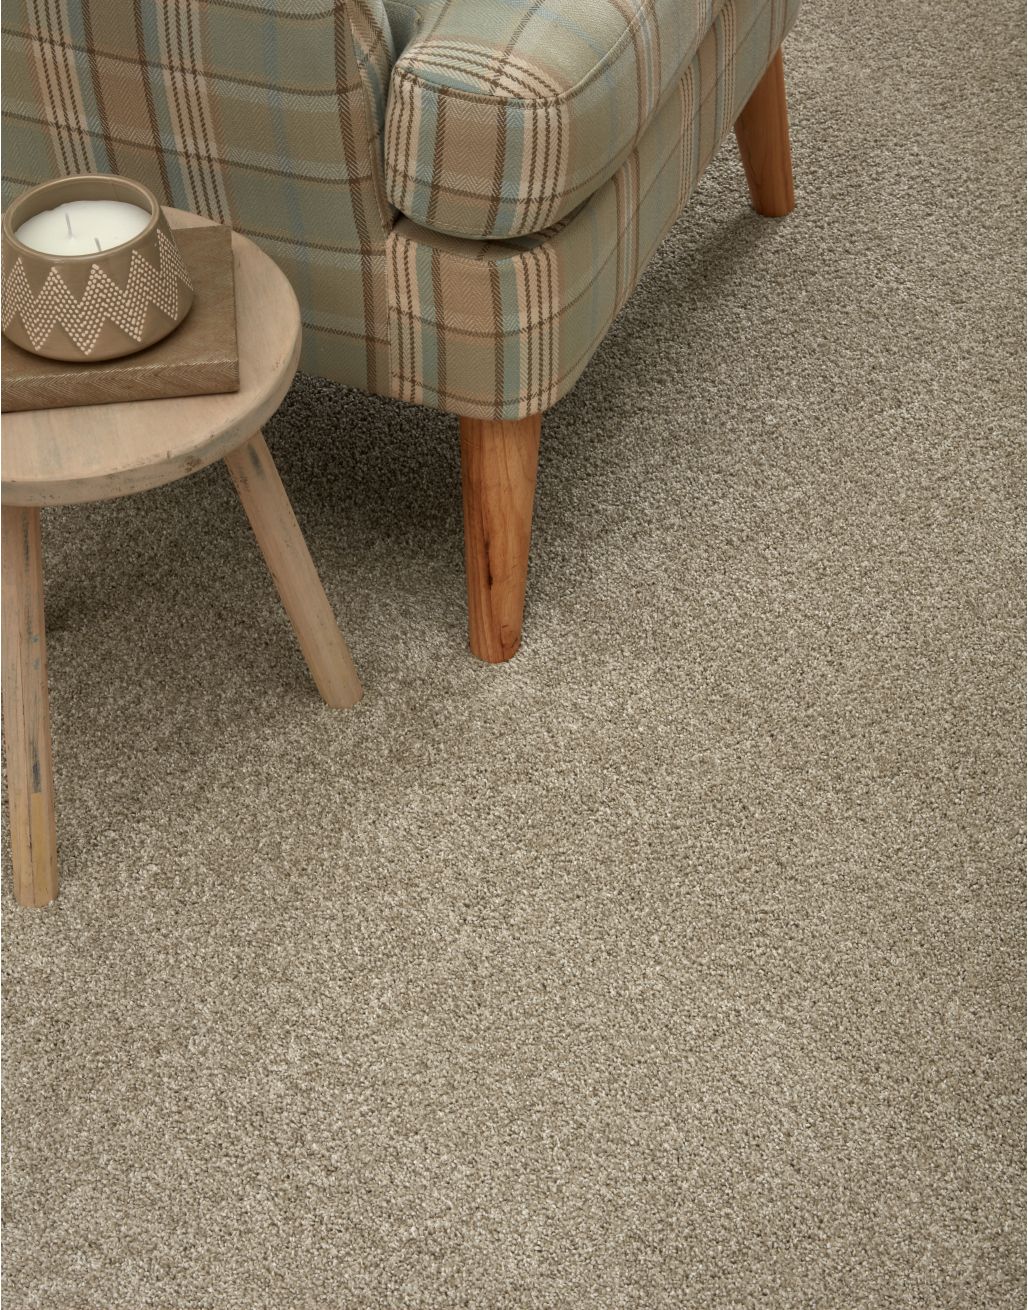 COSY Low Height Saxony Pile Dark Beige 4m Wide Action Backed Carpet at £6.99m² 